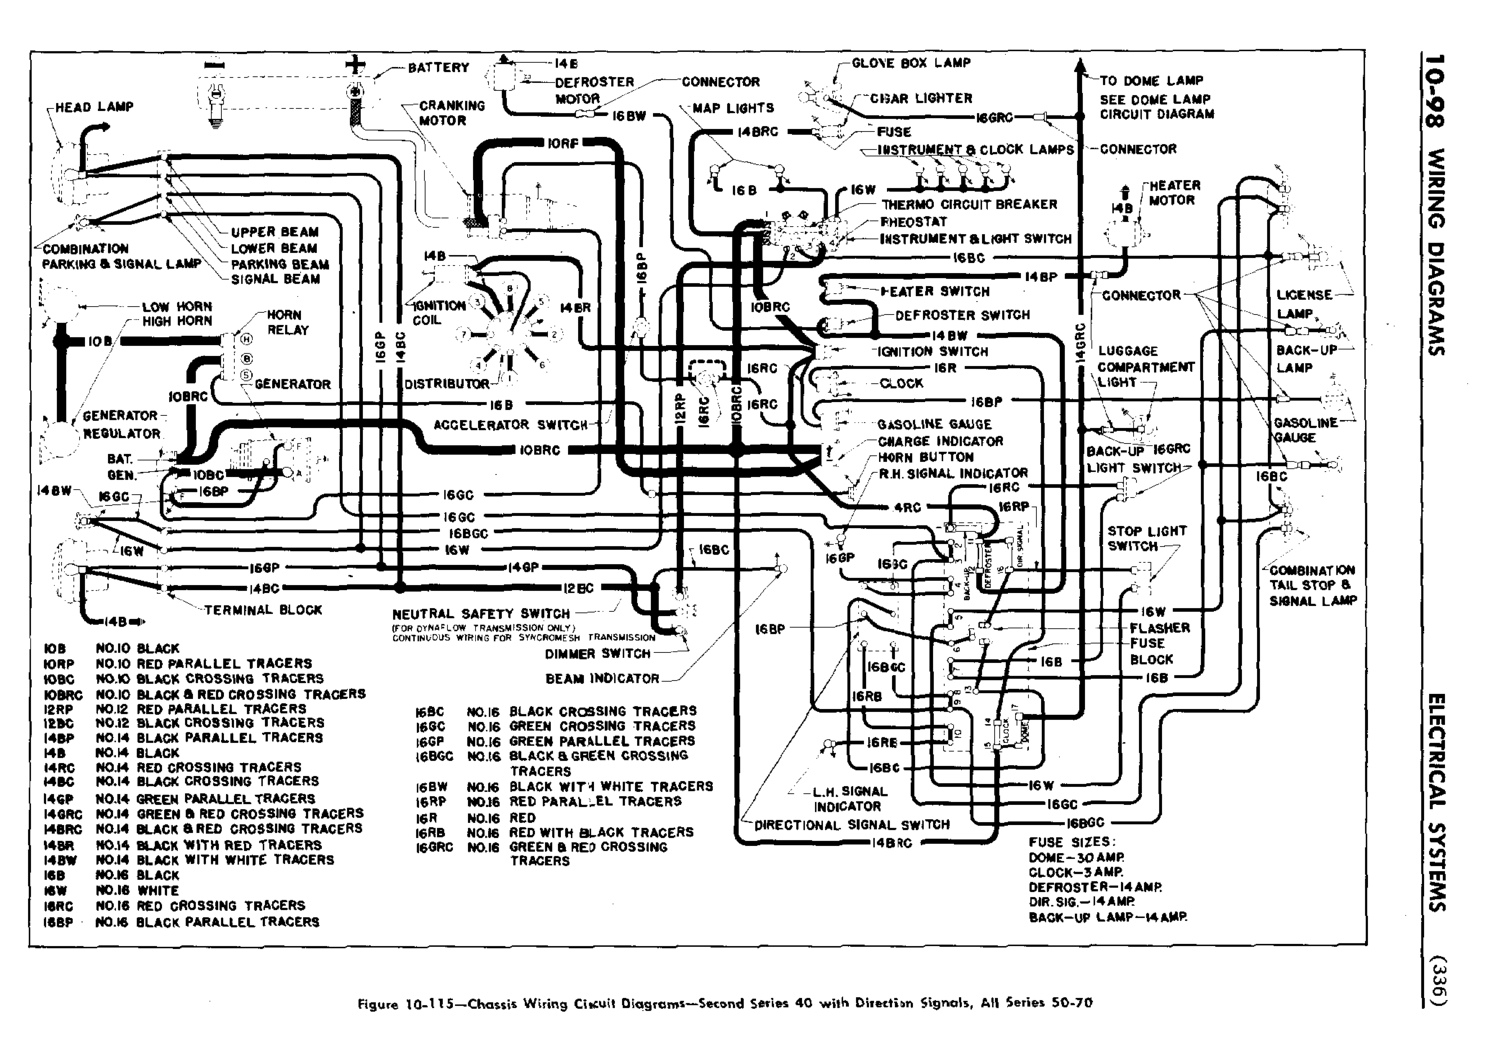 n_11 1950 Buick Shop Manual - Electrical Systems-098-098.jpg